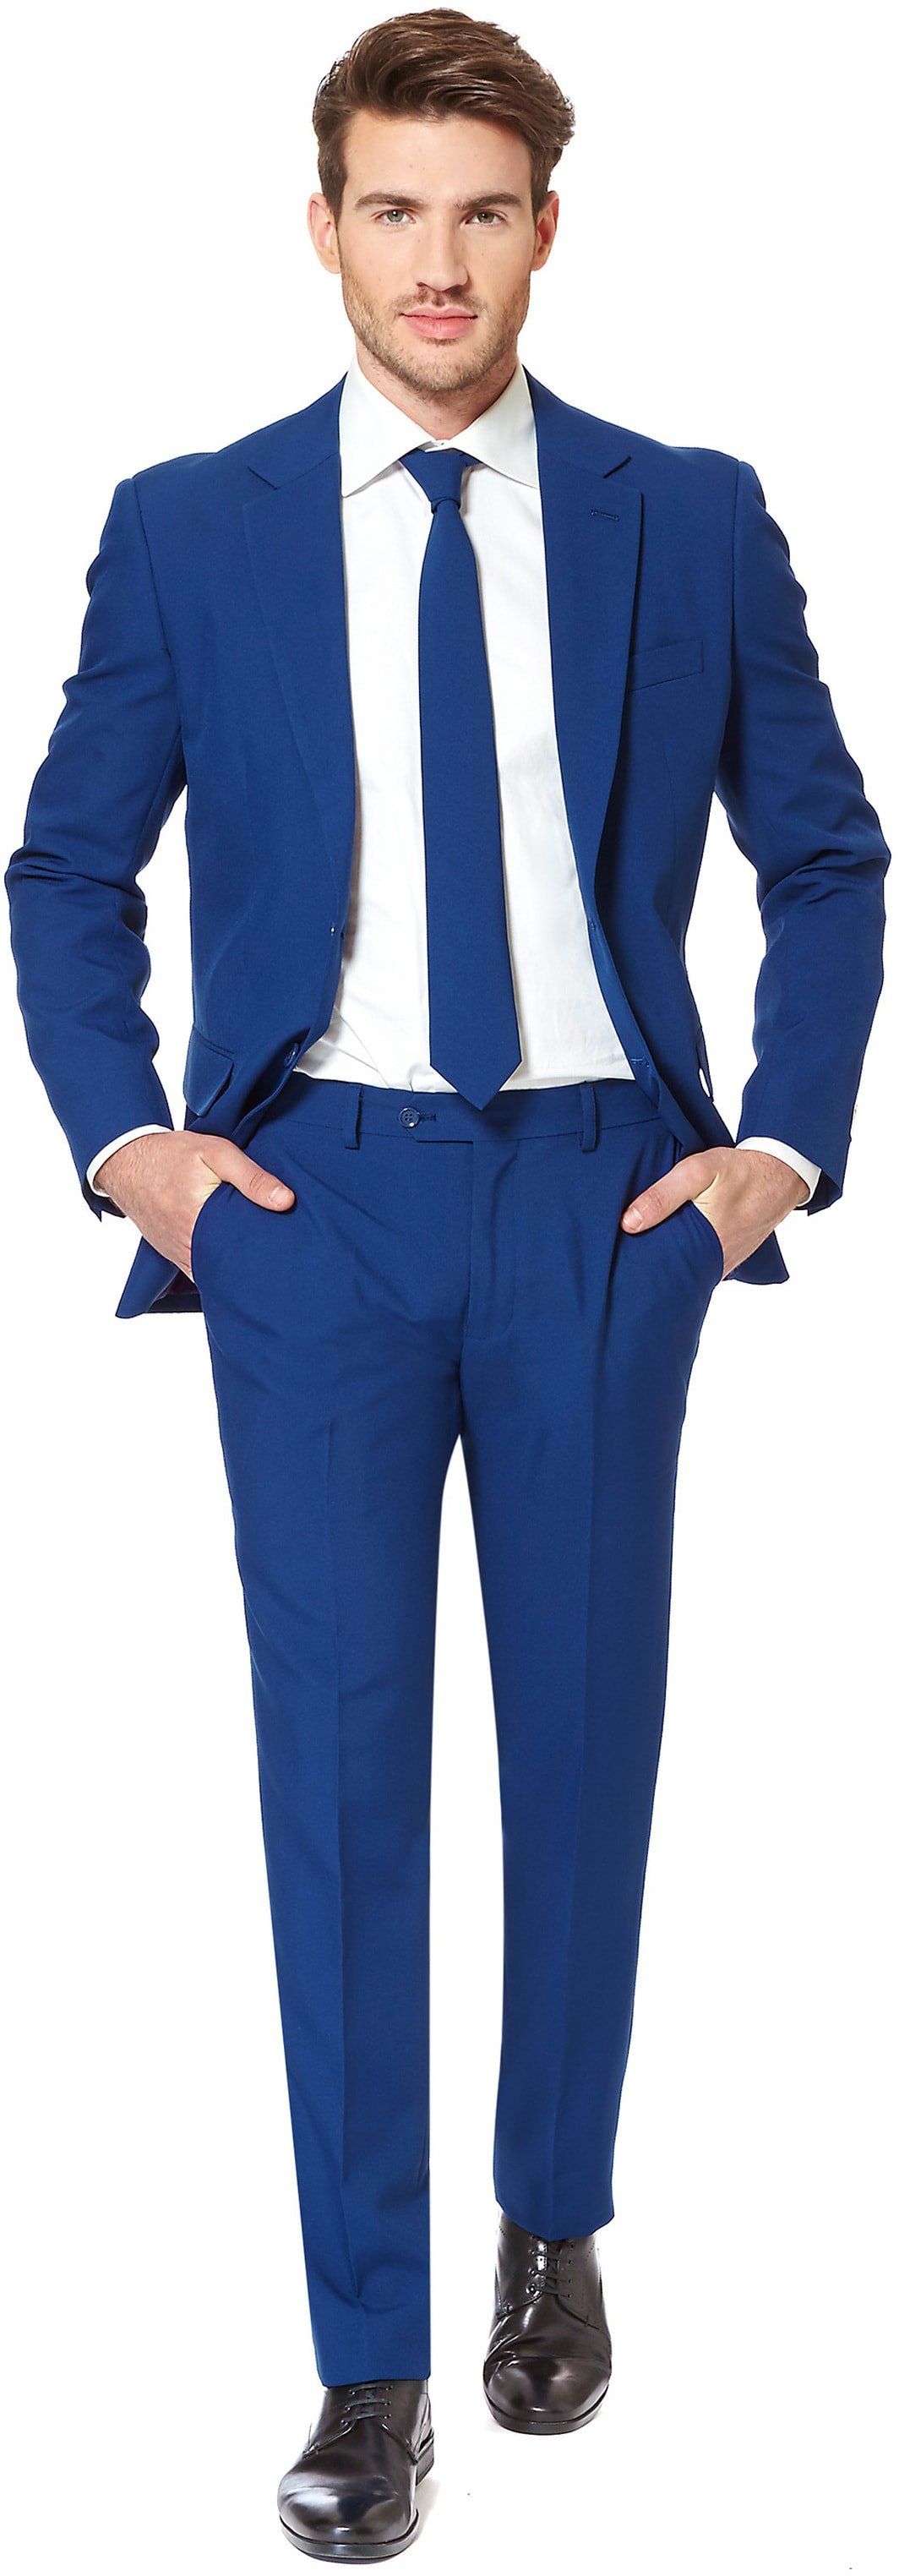 OppoSuits Costume Marine Royale Bleu taille 50